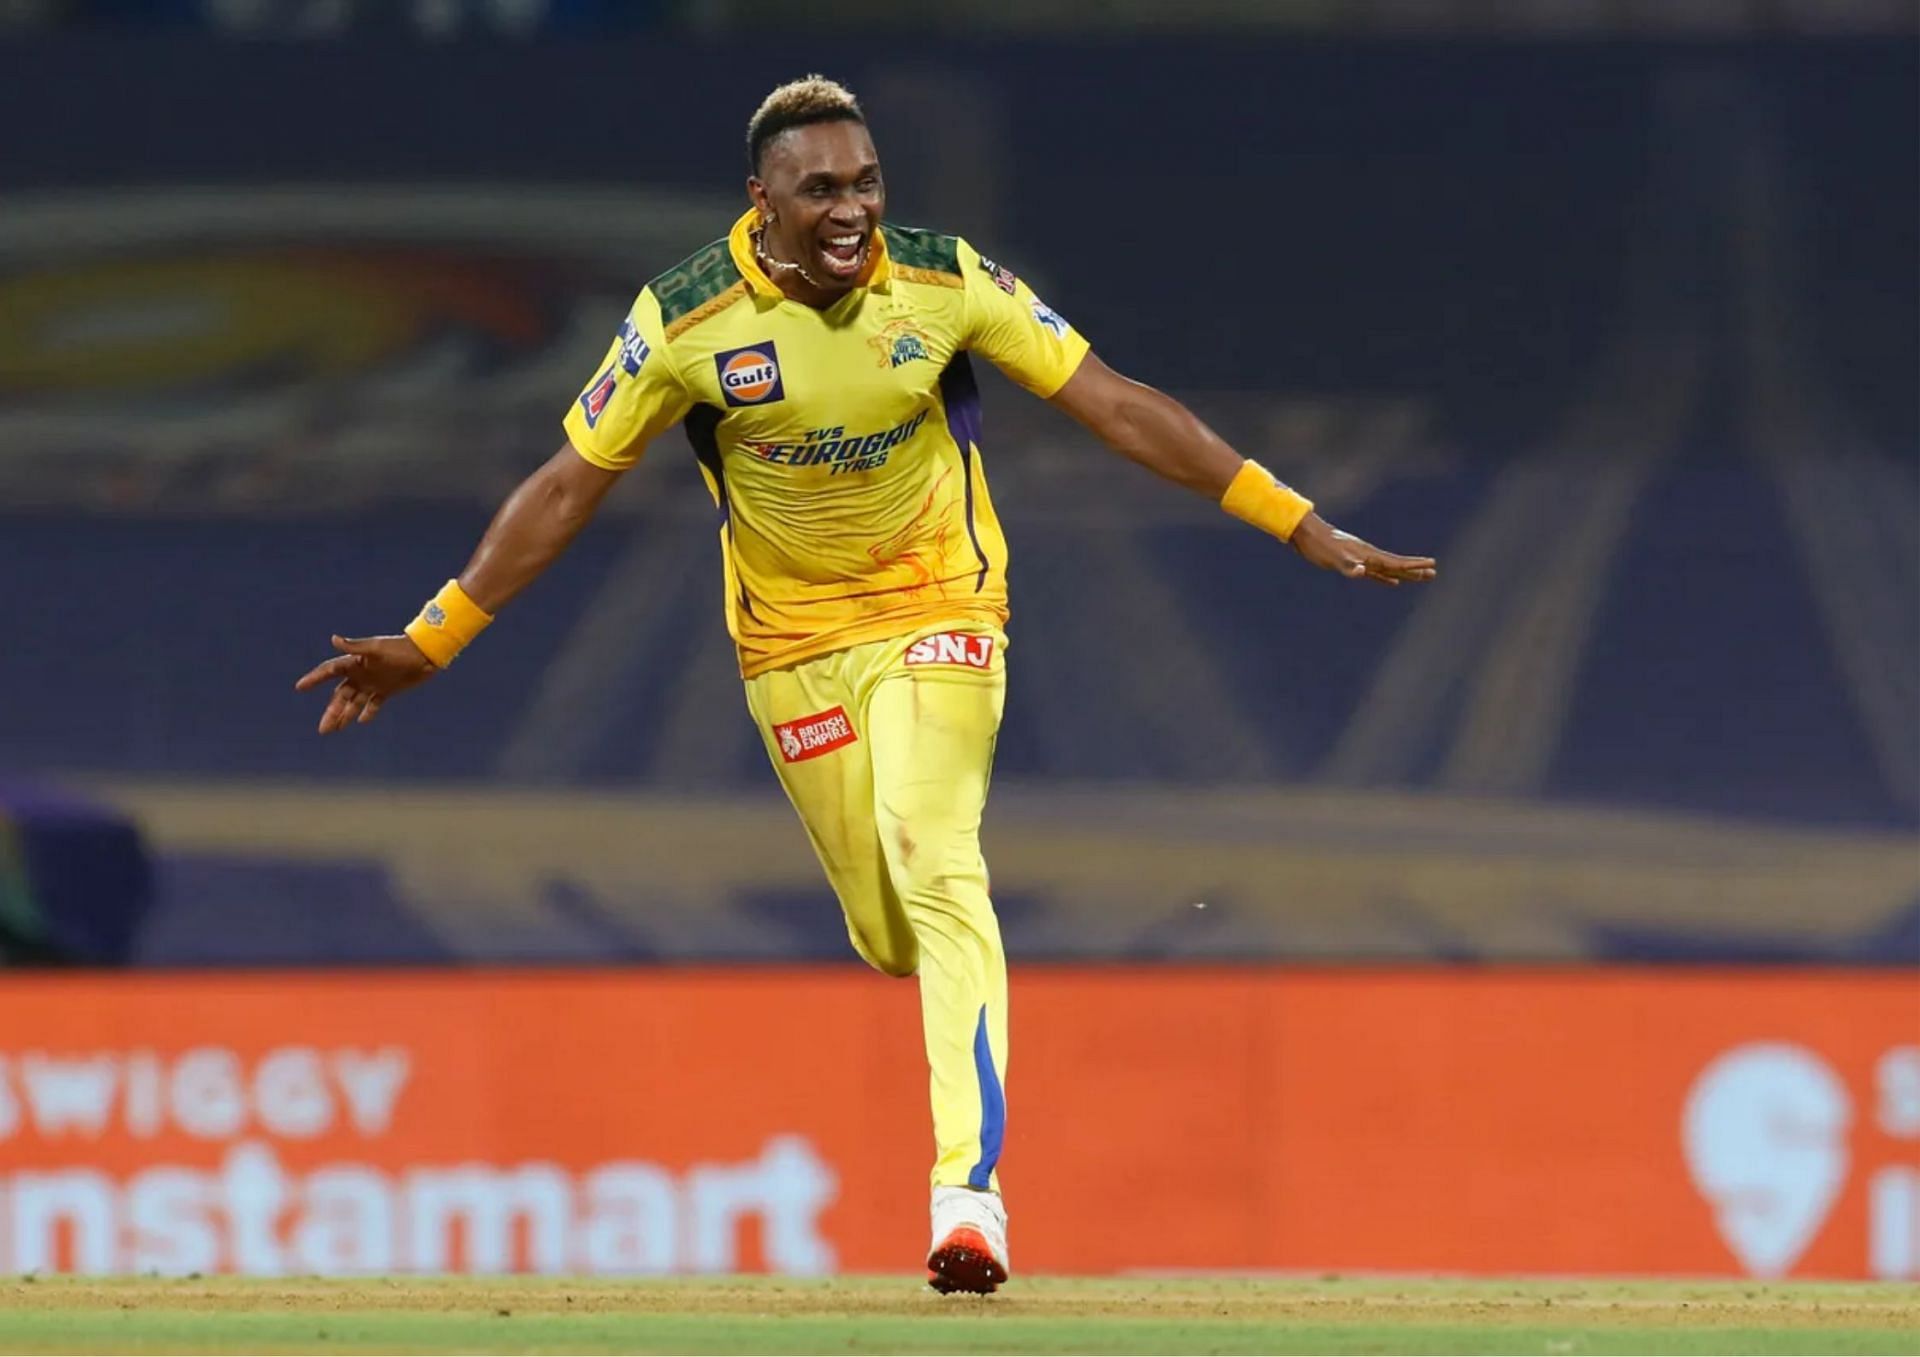 3 teams that could target Dwayne Bravo at the IPL 2023 Auction